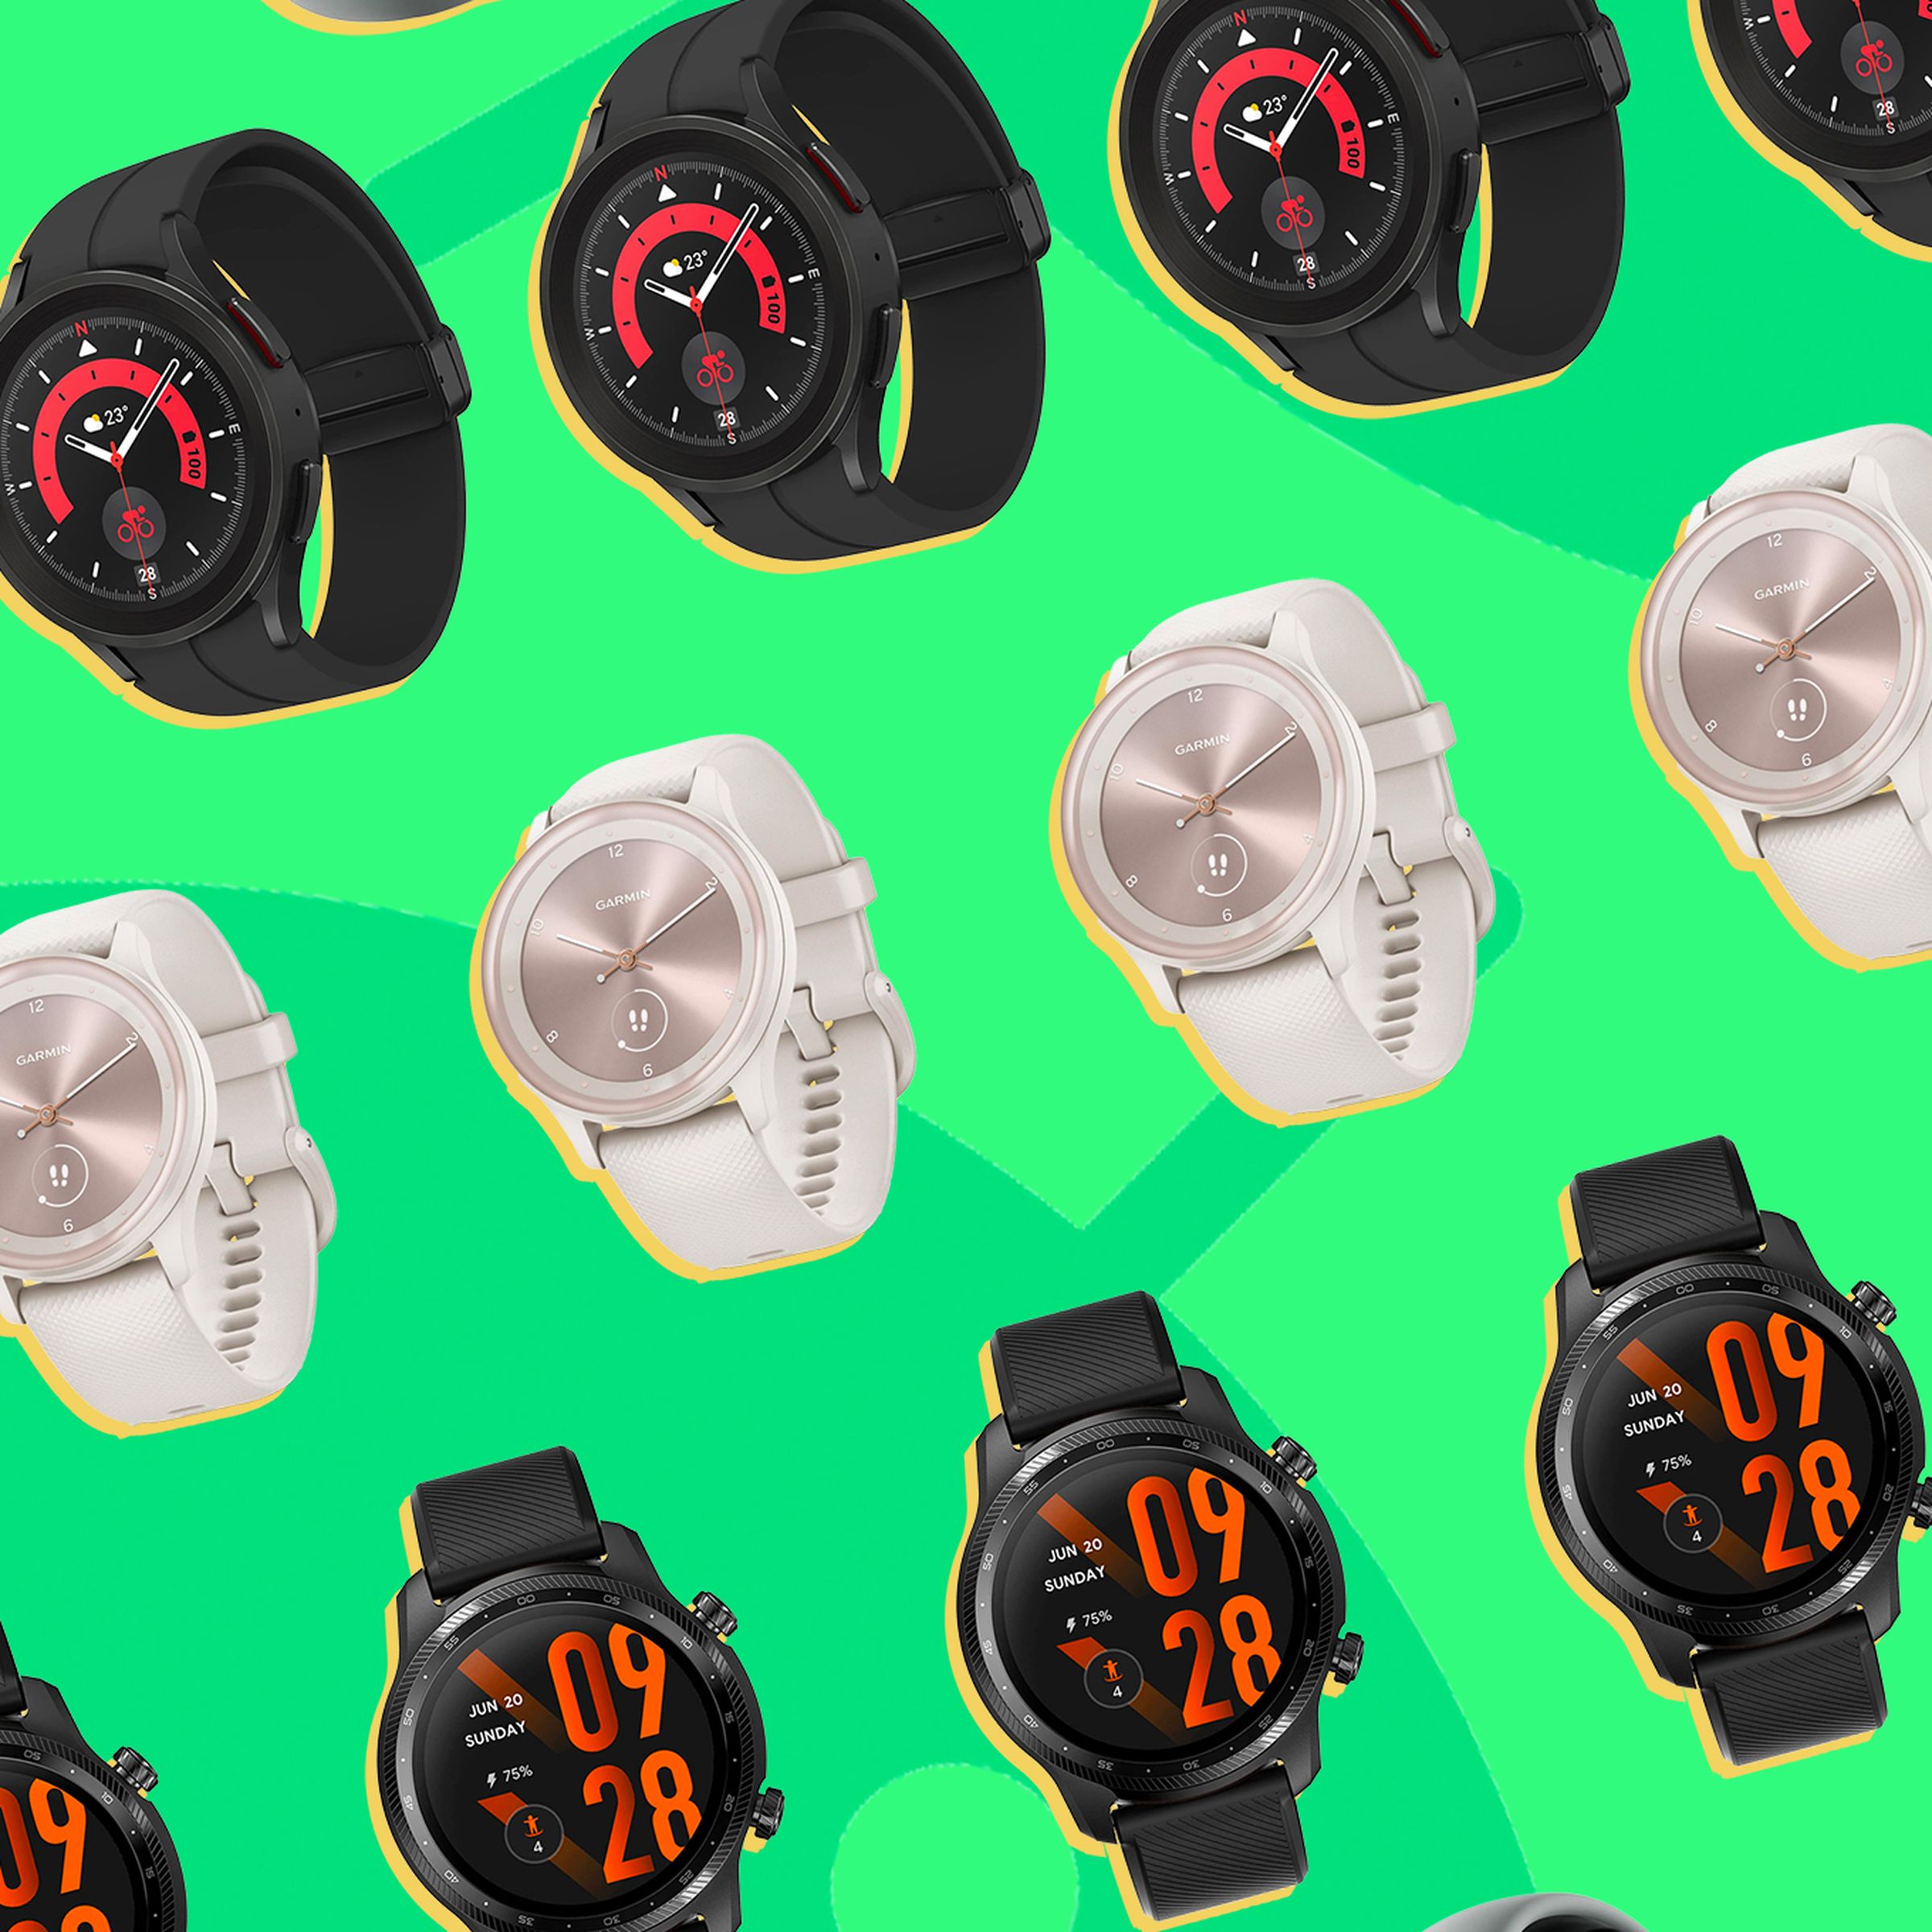 Renders of various Android compatible smartwatches on a green background